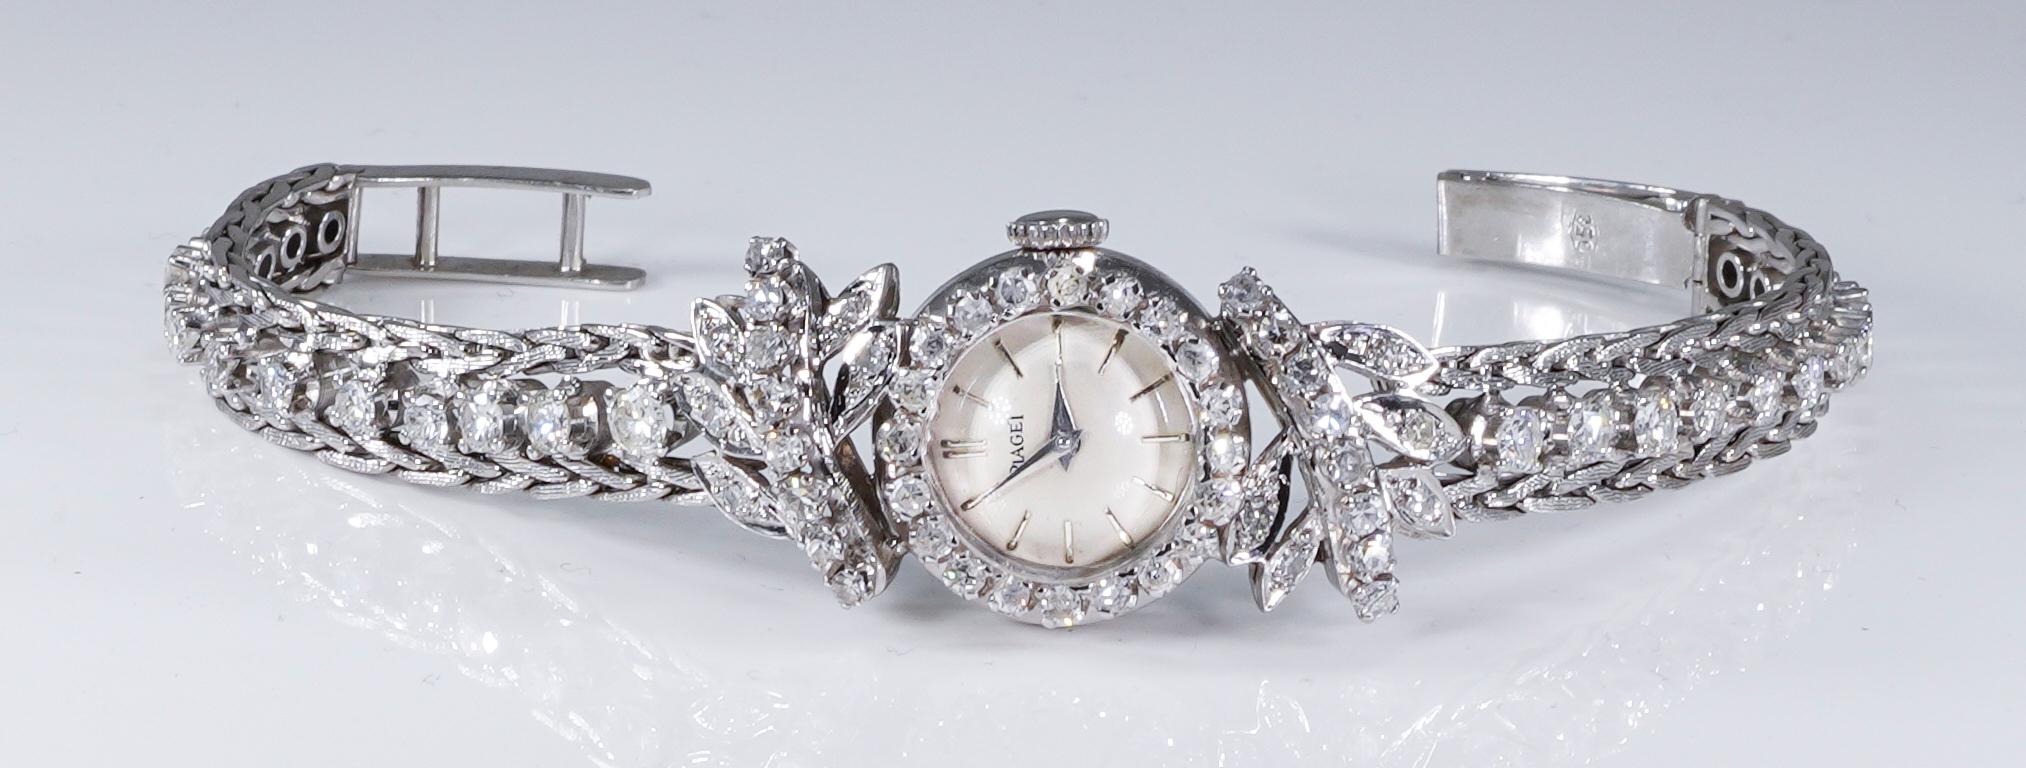 A Unique 1950-60s Piaget 18kt White Gold Diamond Set Tree & Leaf designed Open Work Textured Bracelet Watch

Basic Specifications & Case Dimensions

- Fits up to a 165 mm Wrist Size
*Can be resized shorter or extended as a complimentary service if